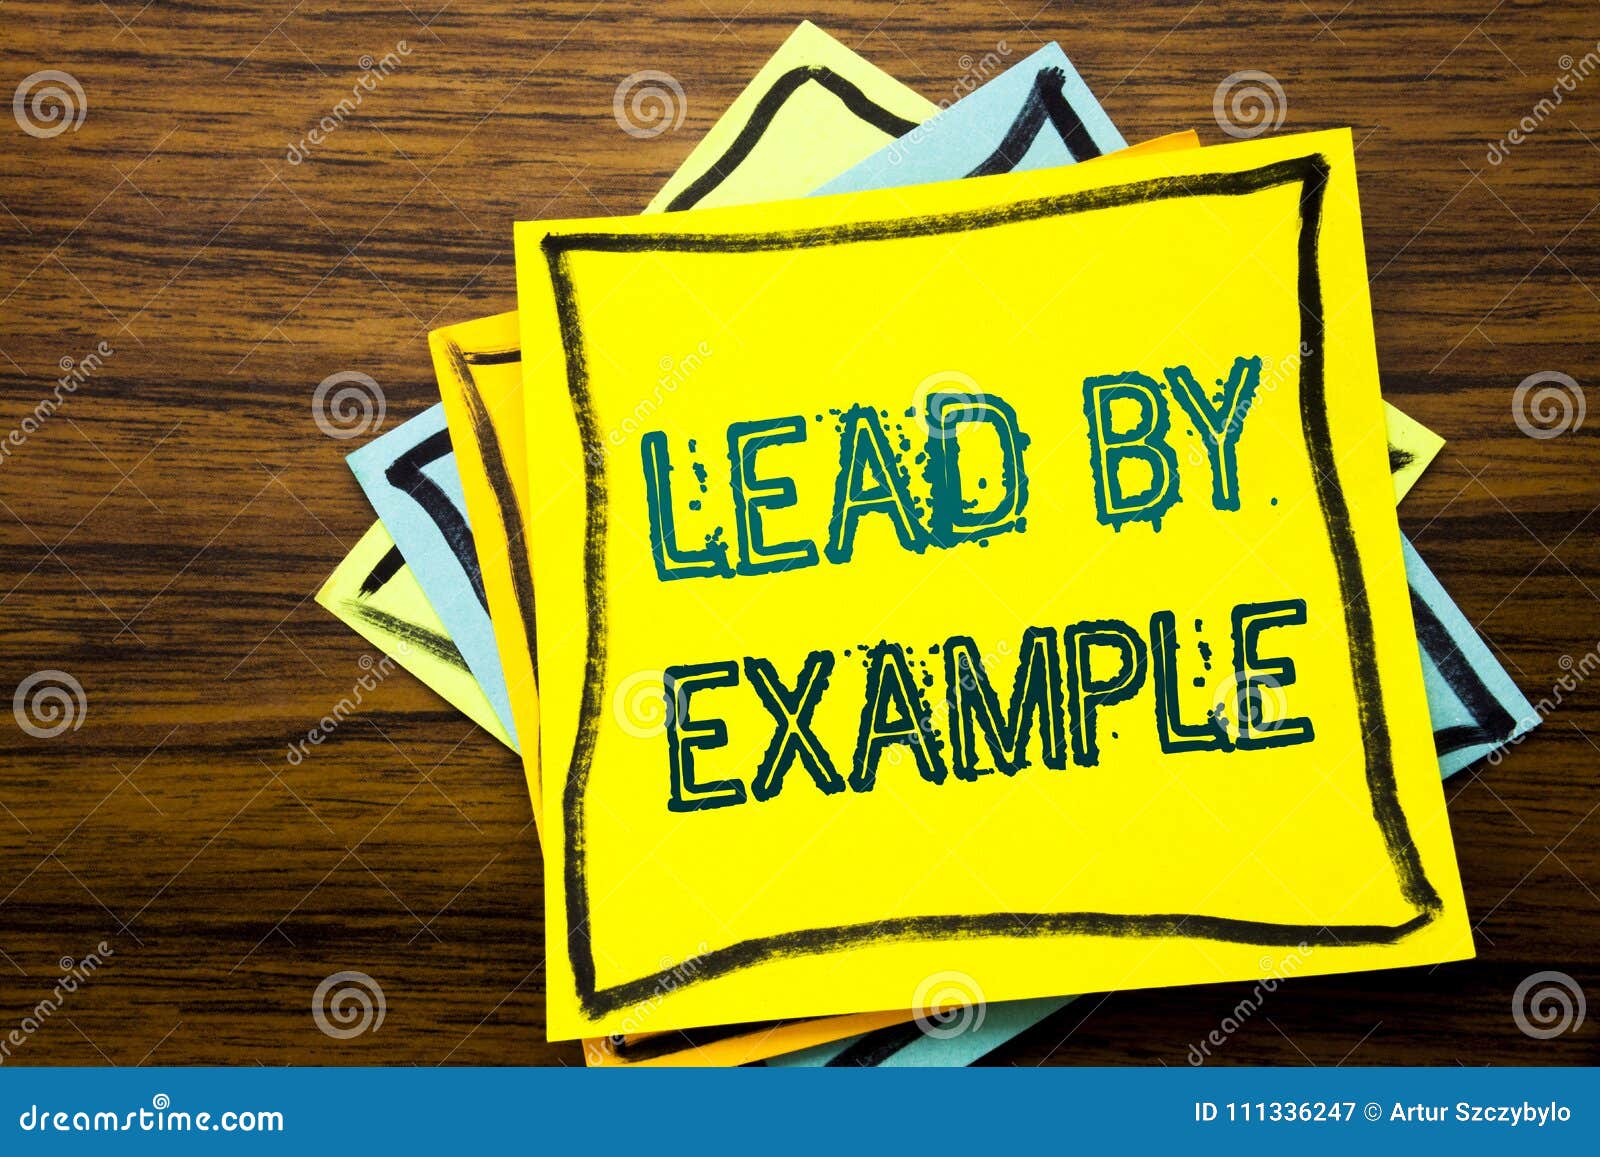 conceptual hand writing text caption inspiration showing lead by example. business concept for motivation inspiration written on s